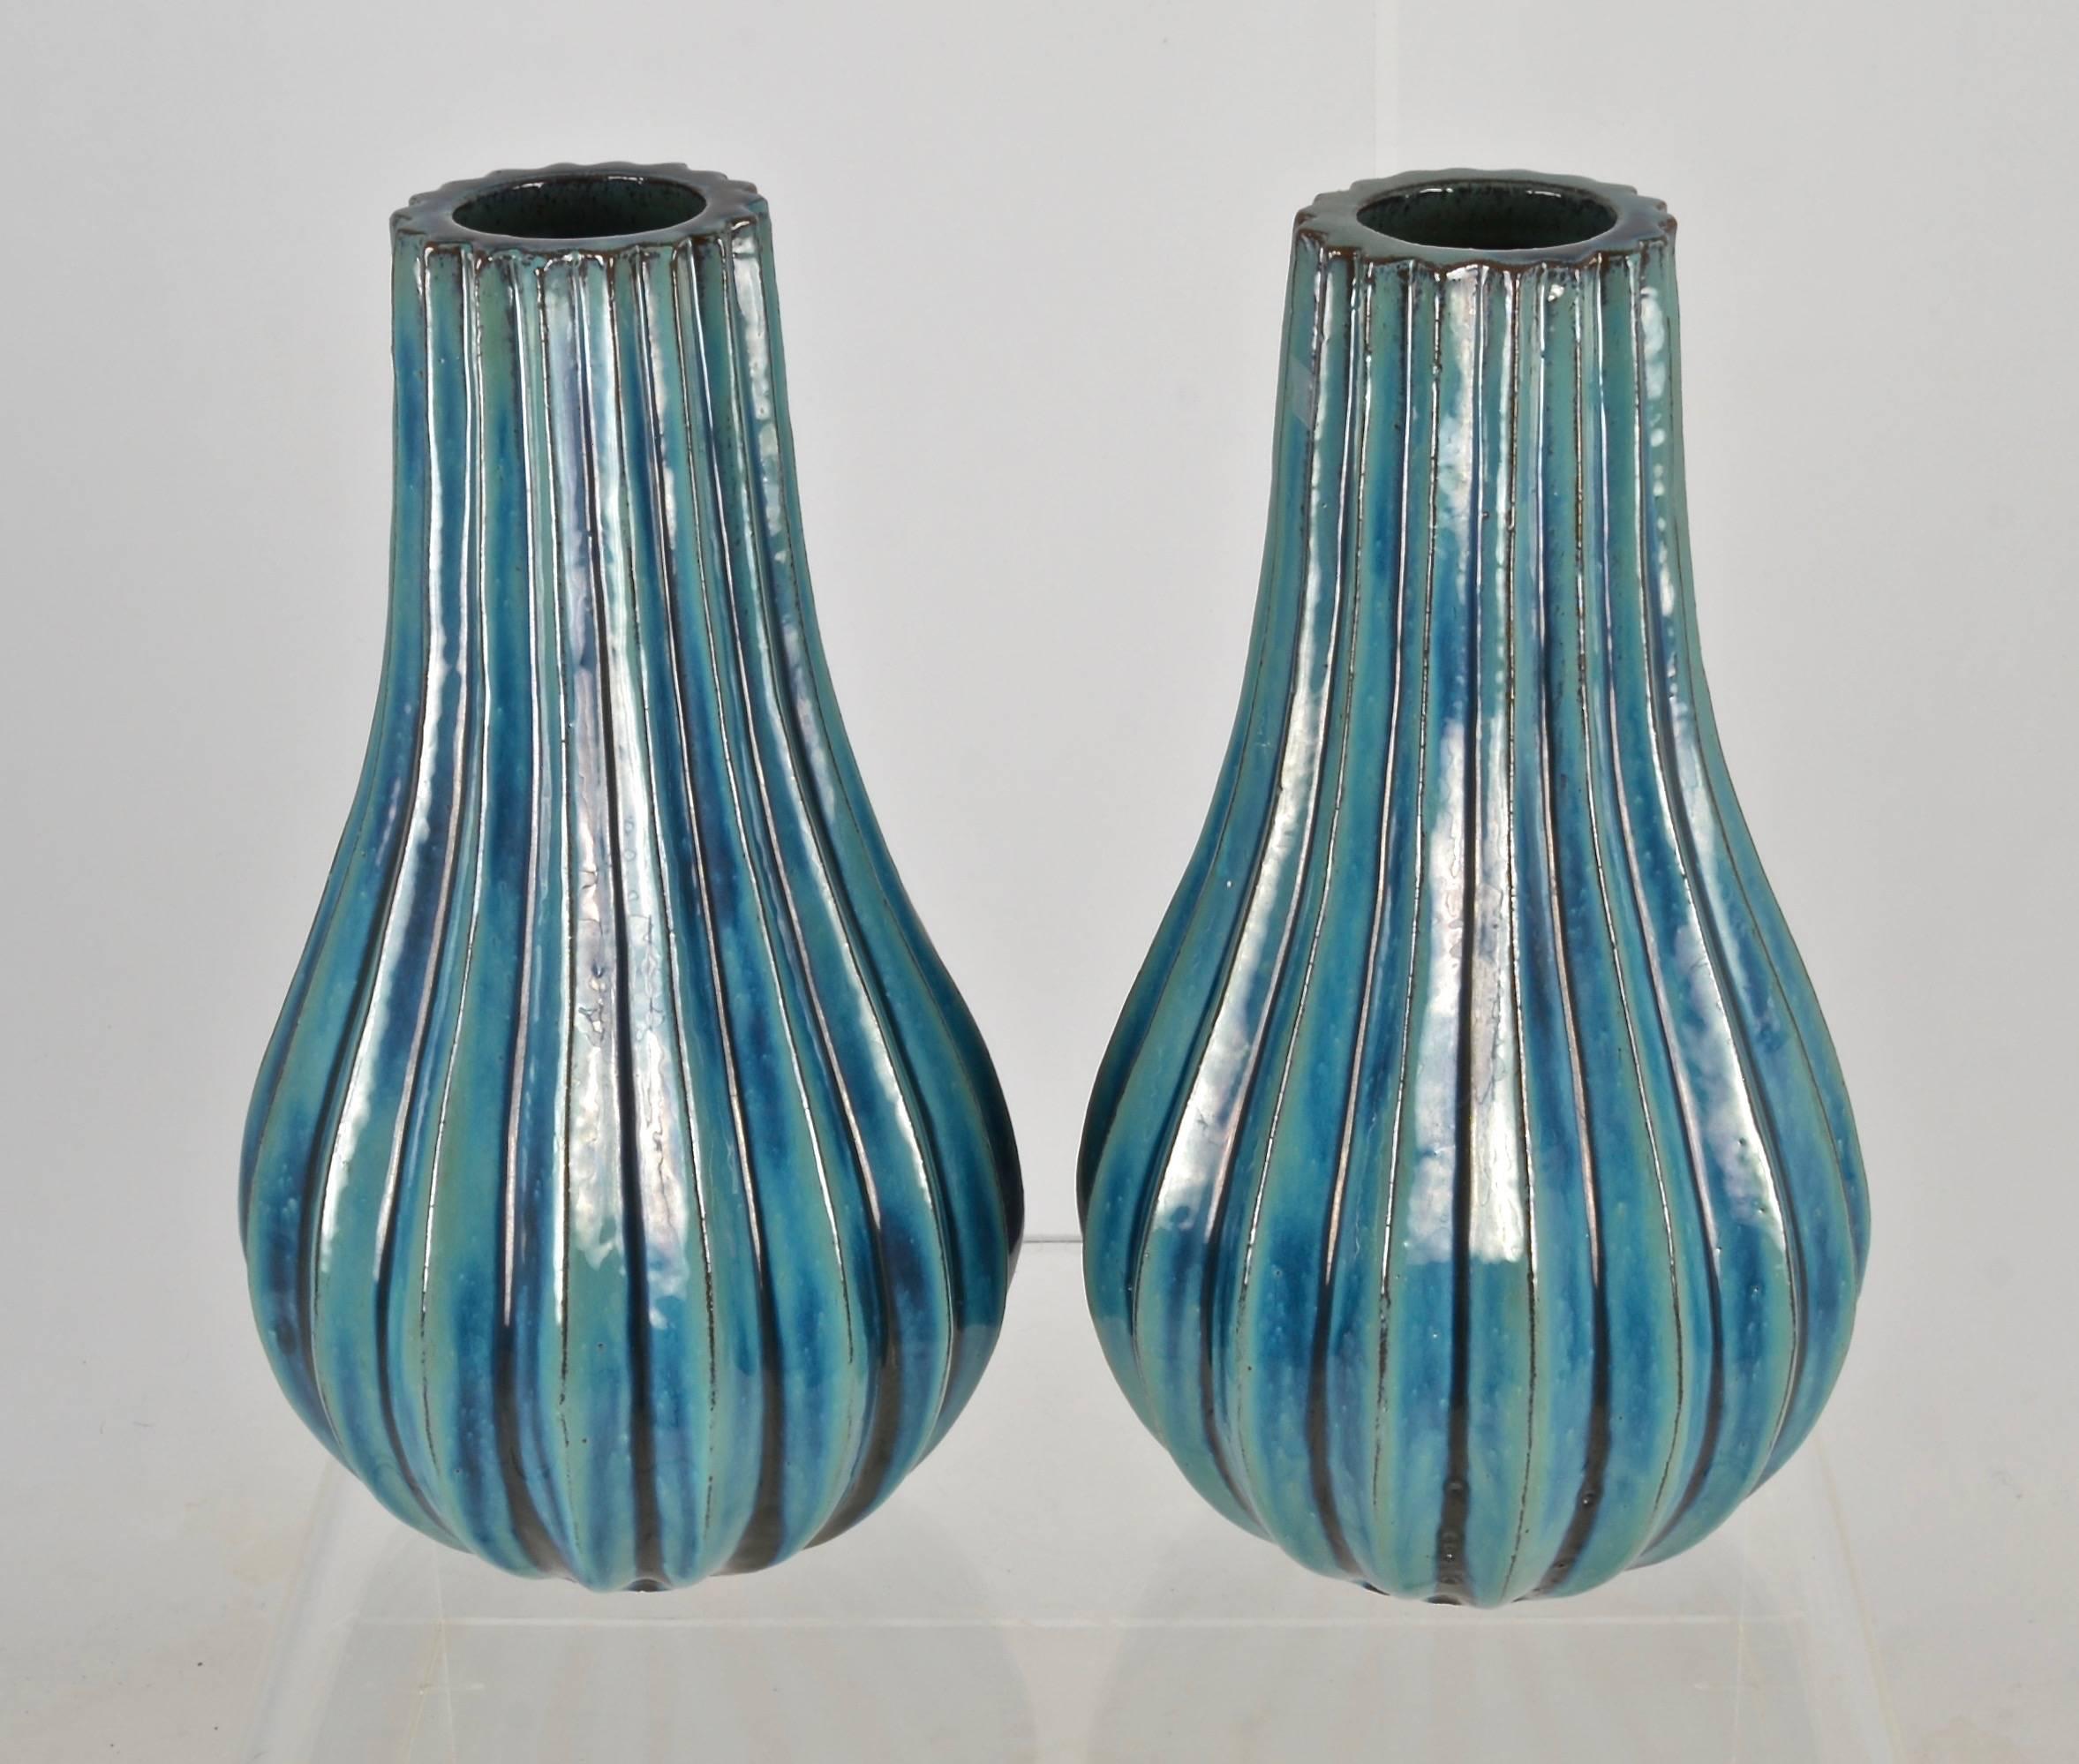 Just great color and form. Good size at 20 inches height and 10 inches diameter.